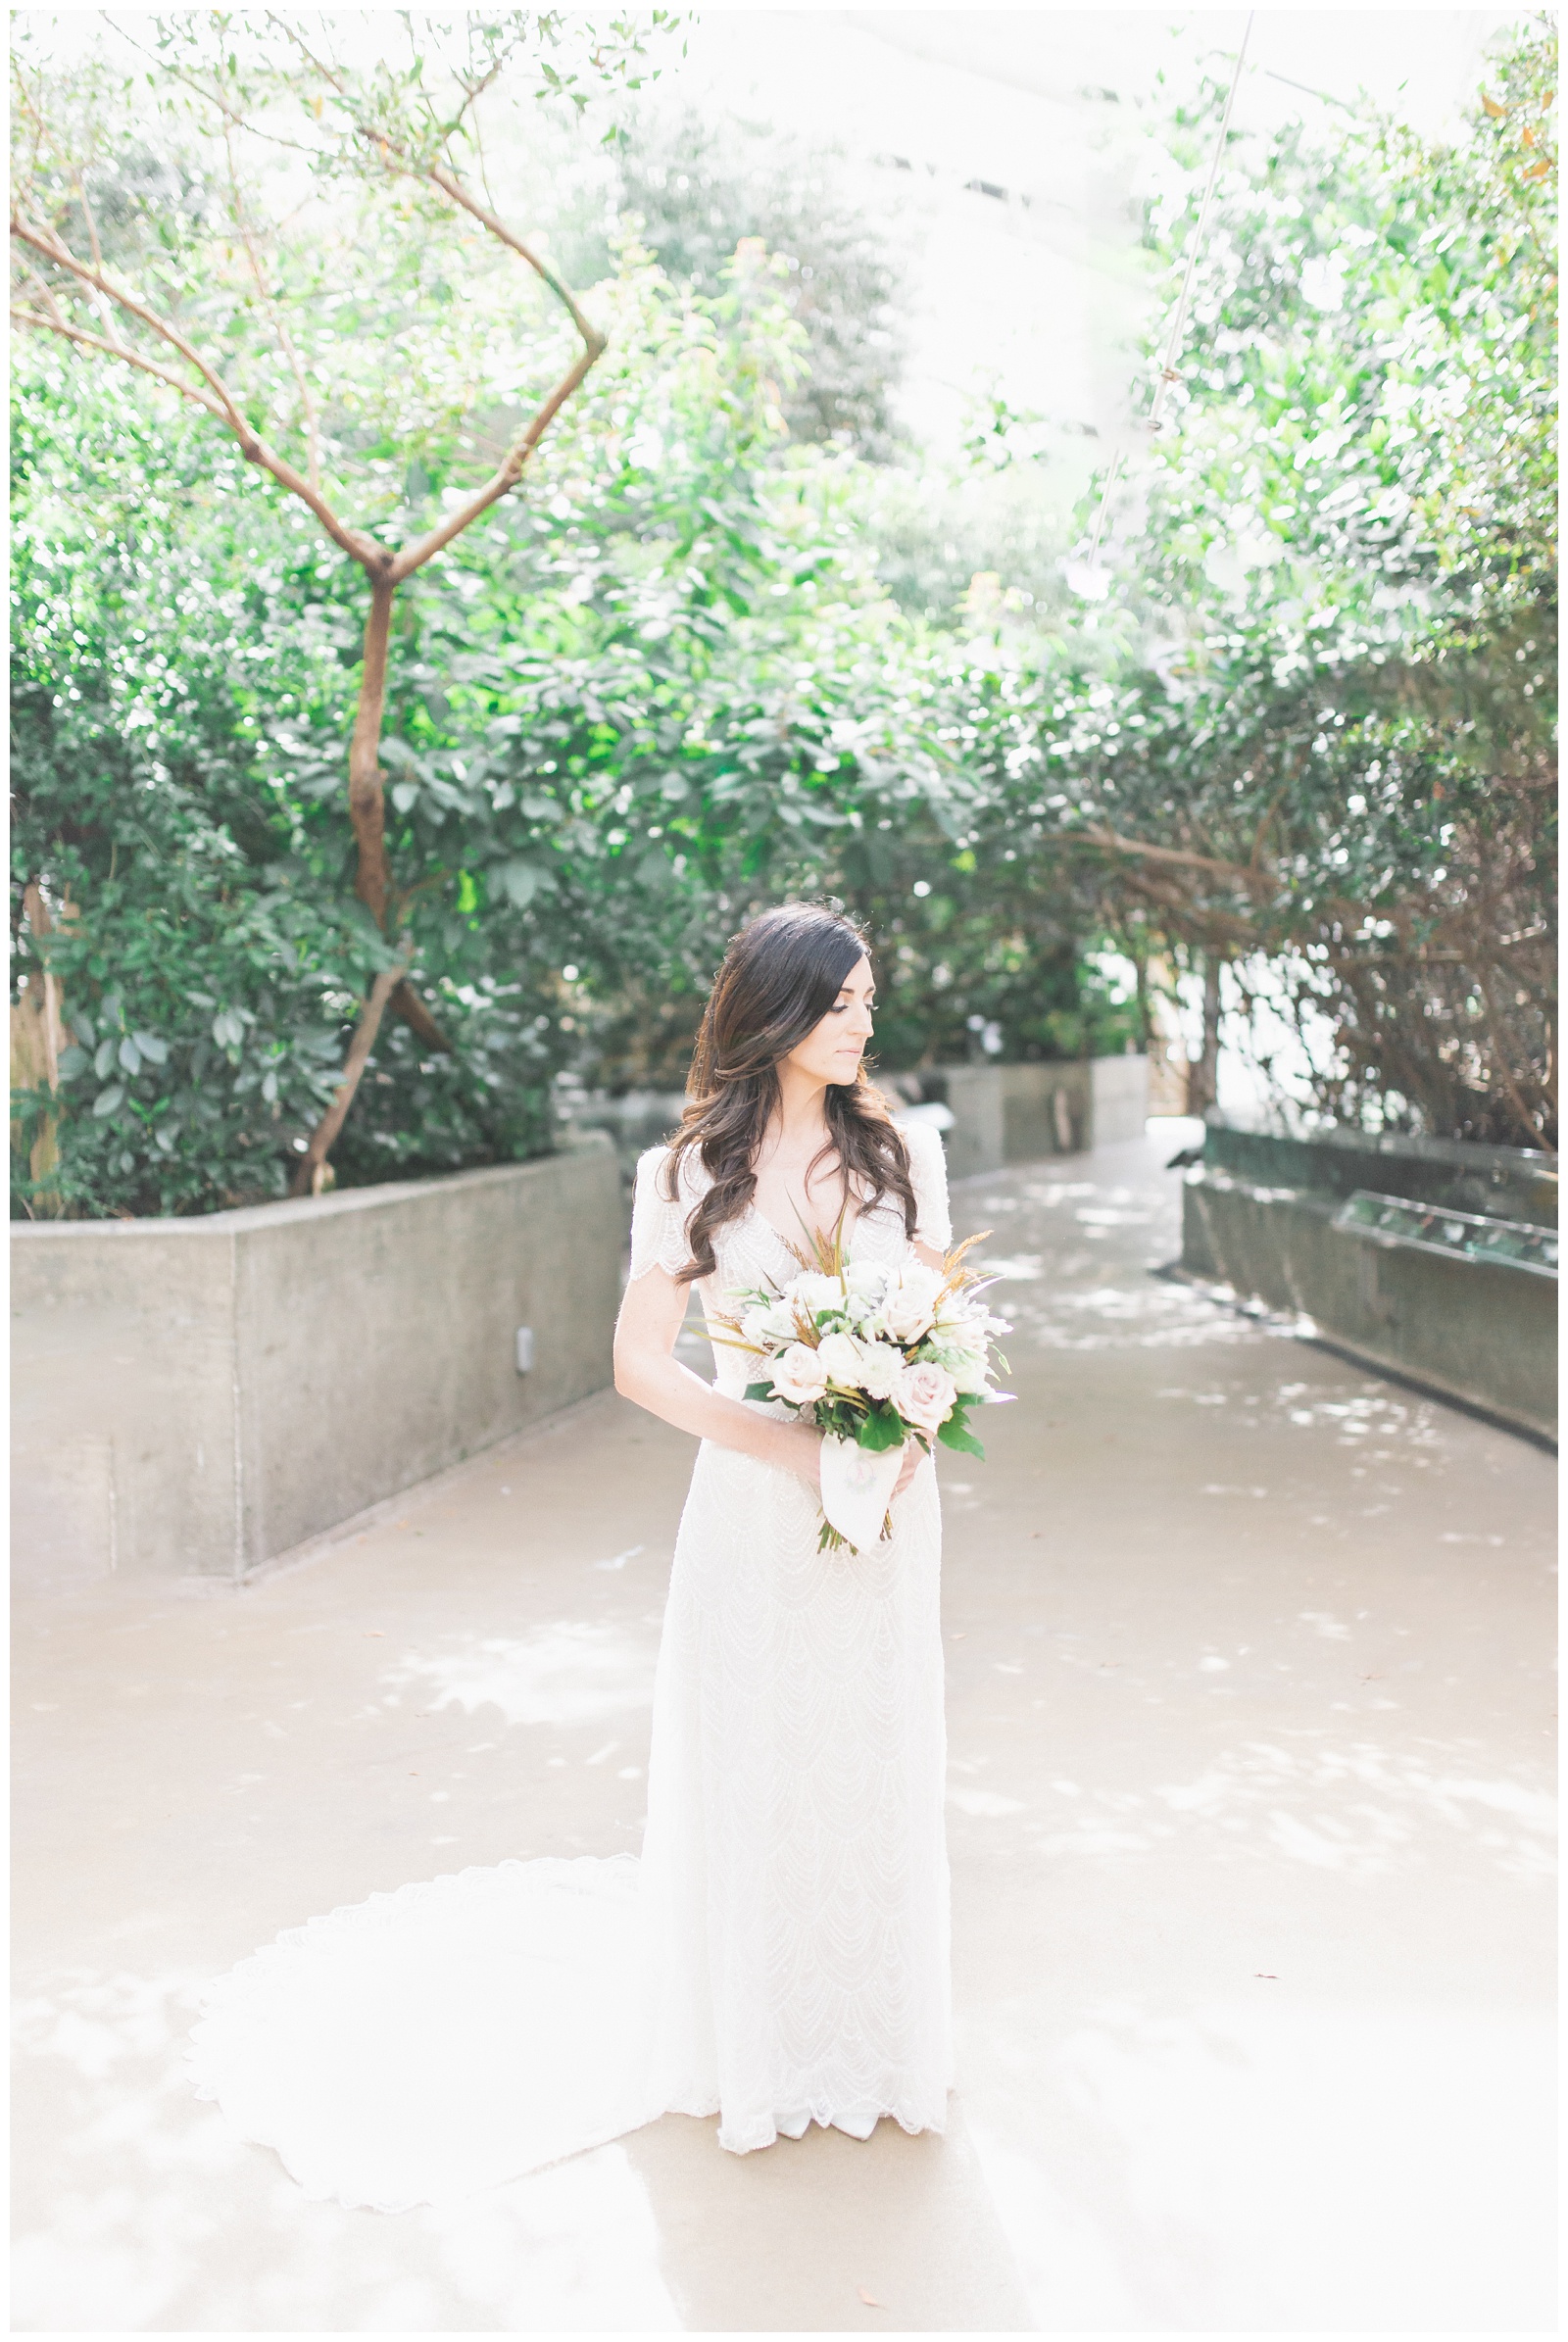 Portrait of the bride at the Florida Aquarium | Matlock and Kelly Photography